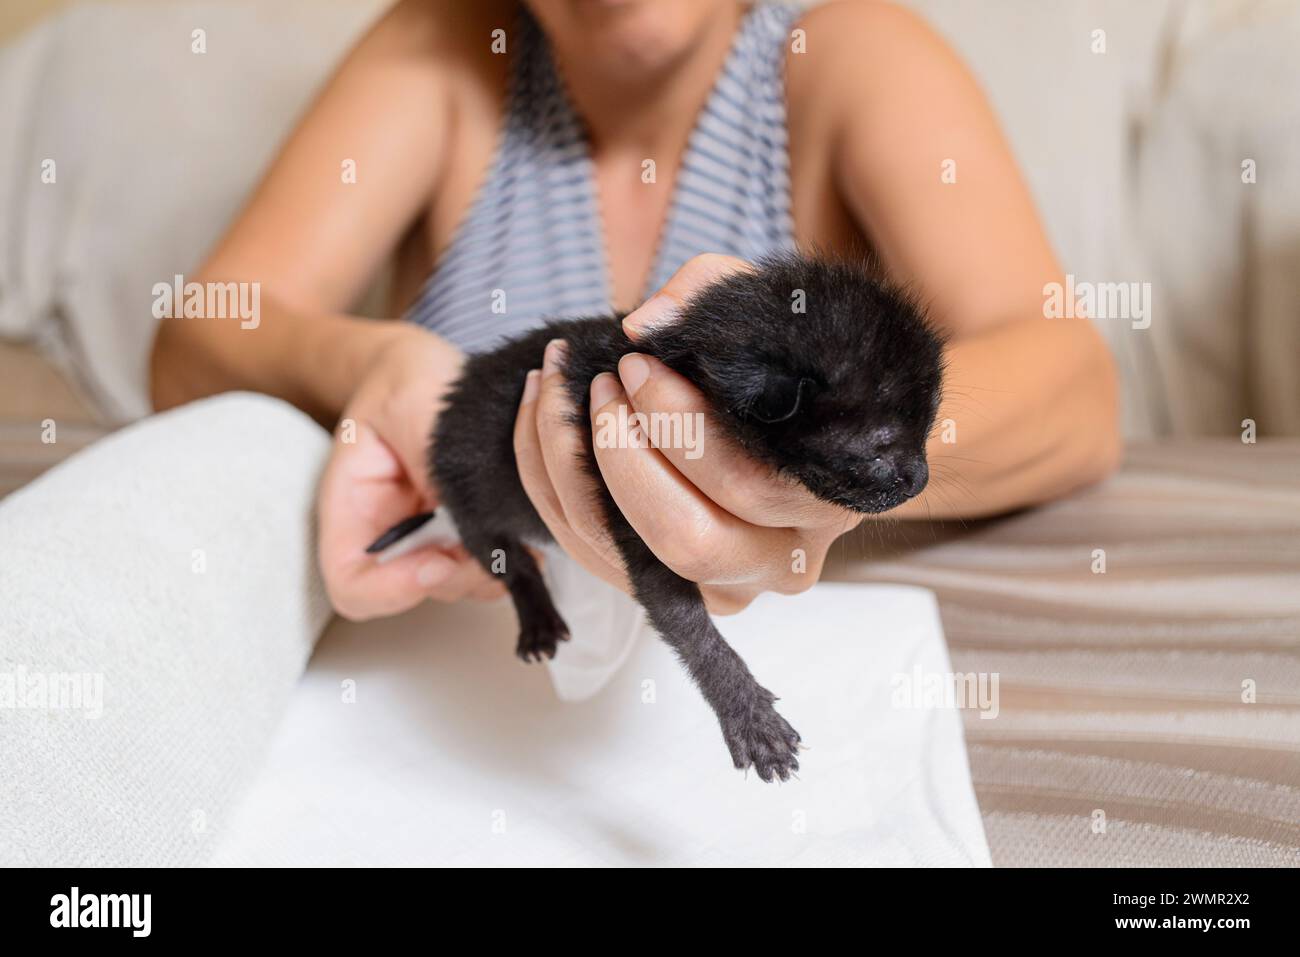 A woman helps an orphaned kitten to poo. Very young kittens need encouragement to help them relieve themselves. Stock Photo